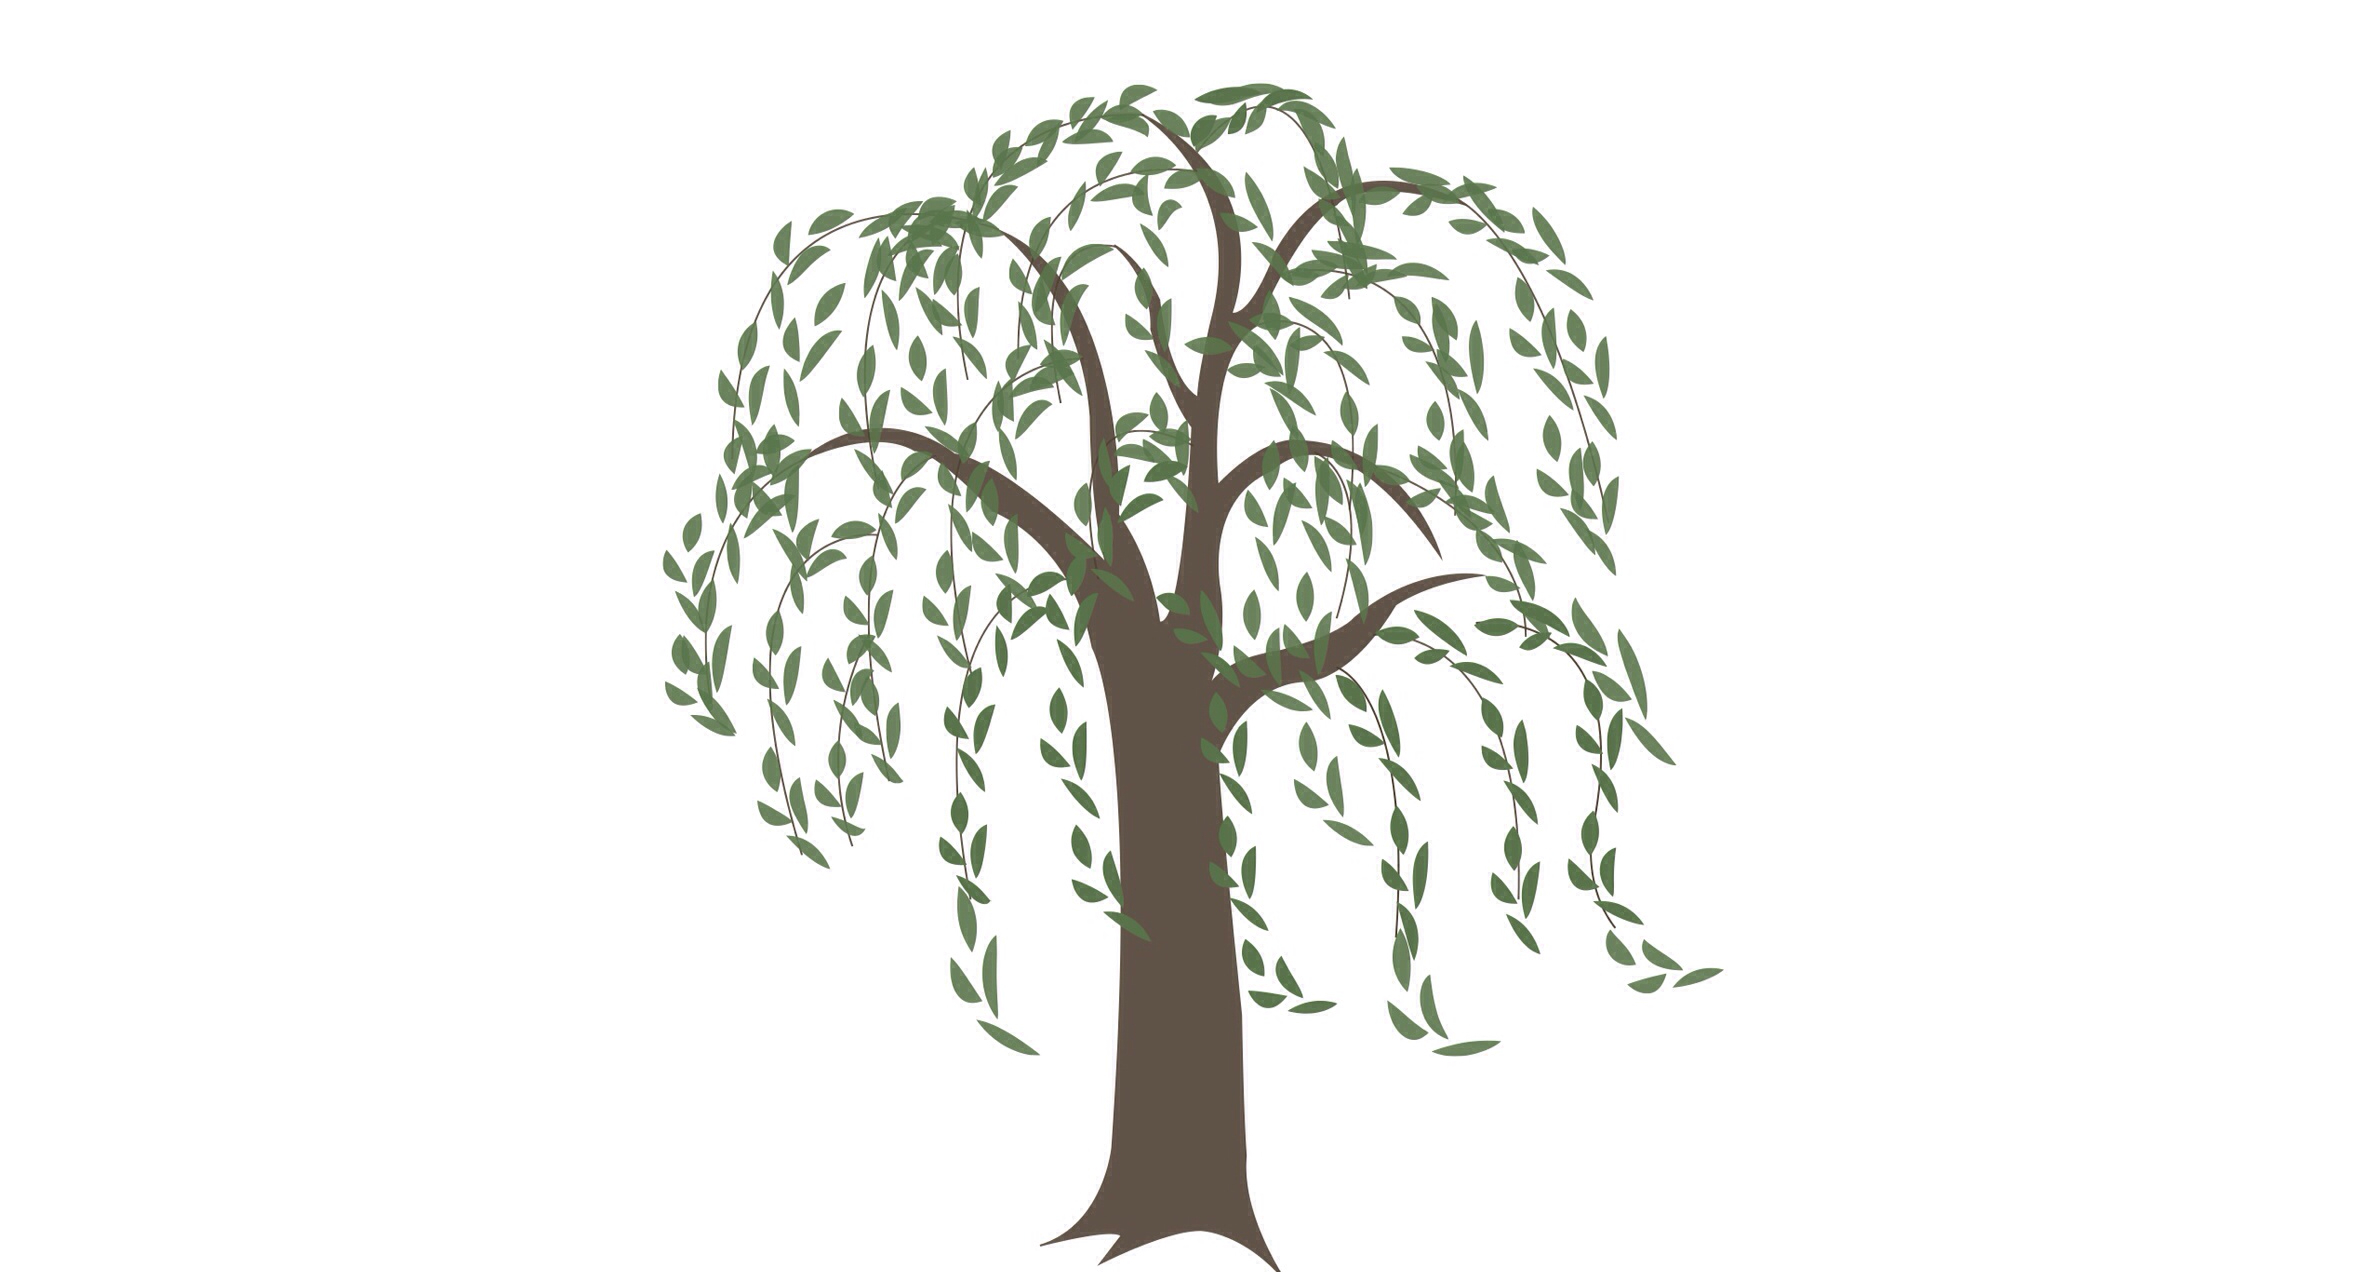 willow tree clip art images - photo #9